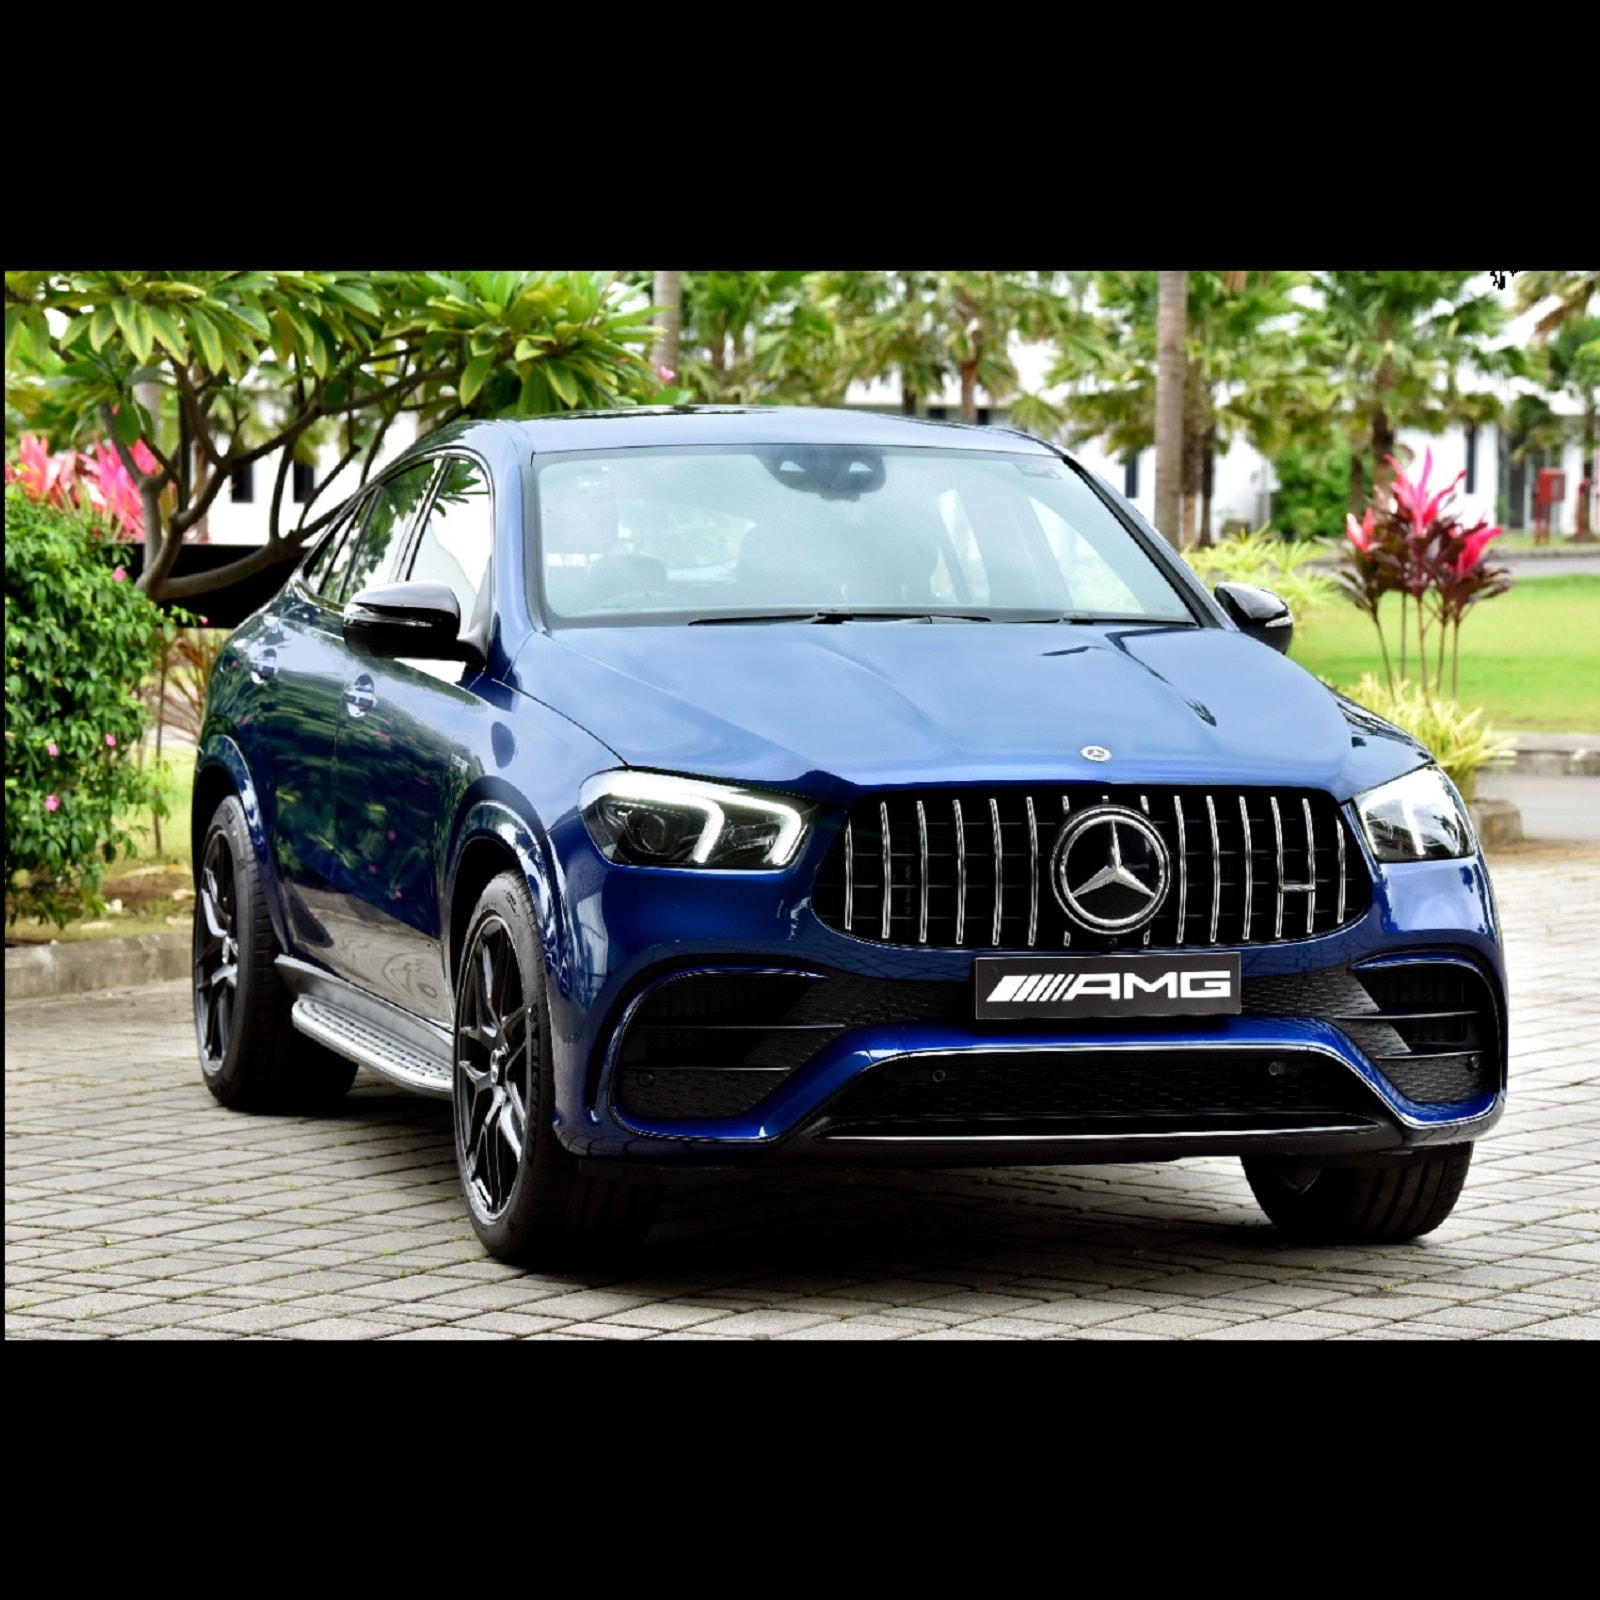 Used 2021 Mercedes-Benz GLE63 S AMG 4Matic SUV HUGE MSRP! Carbon